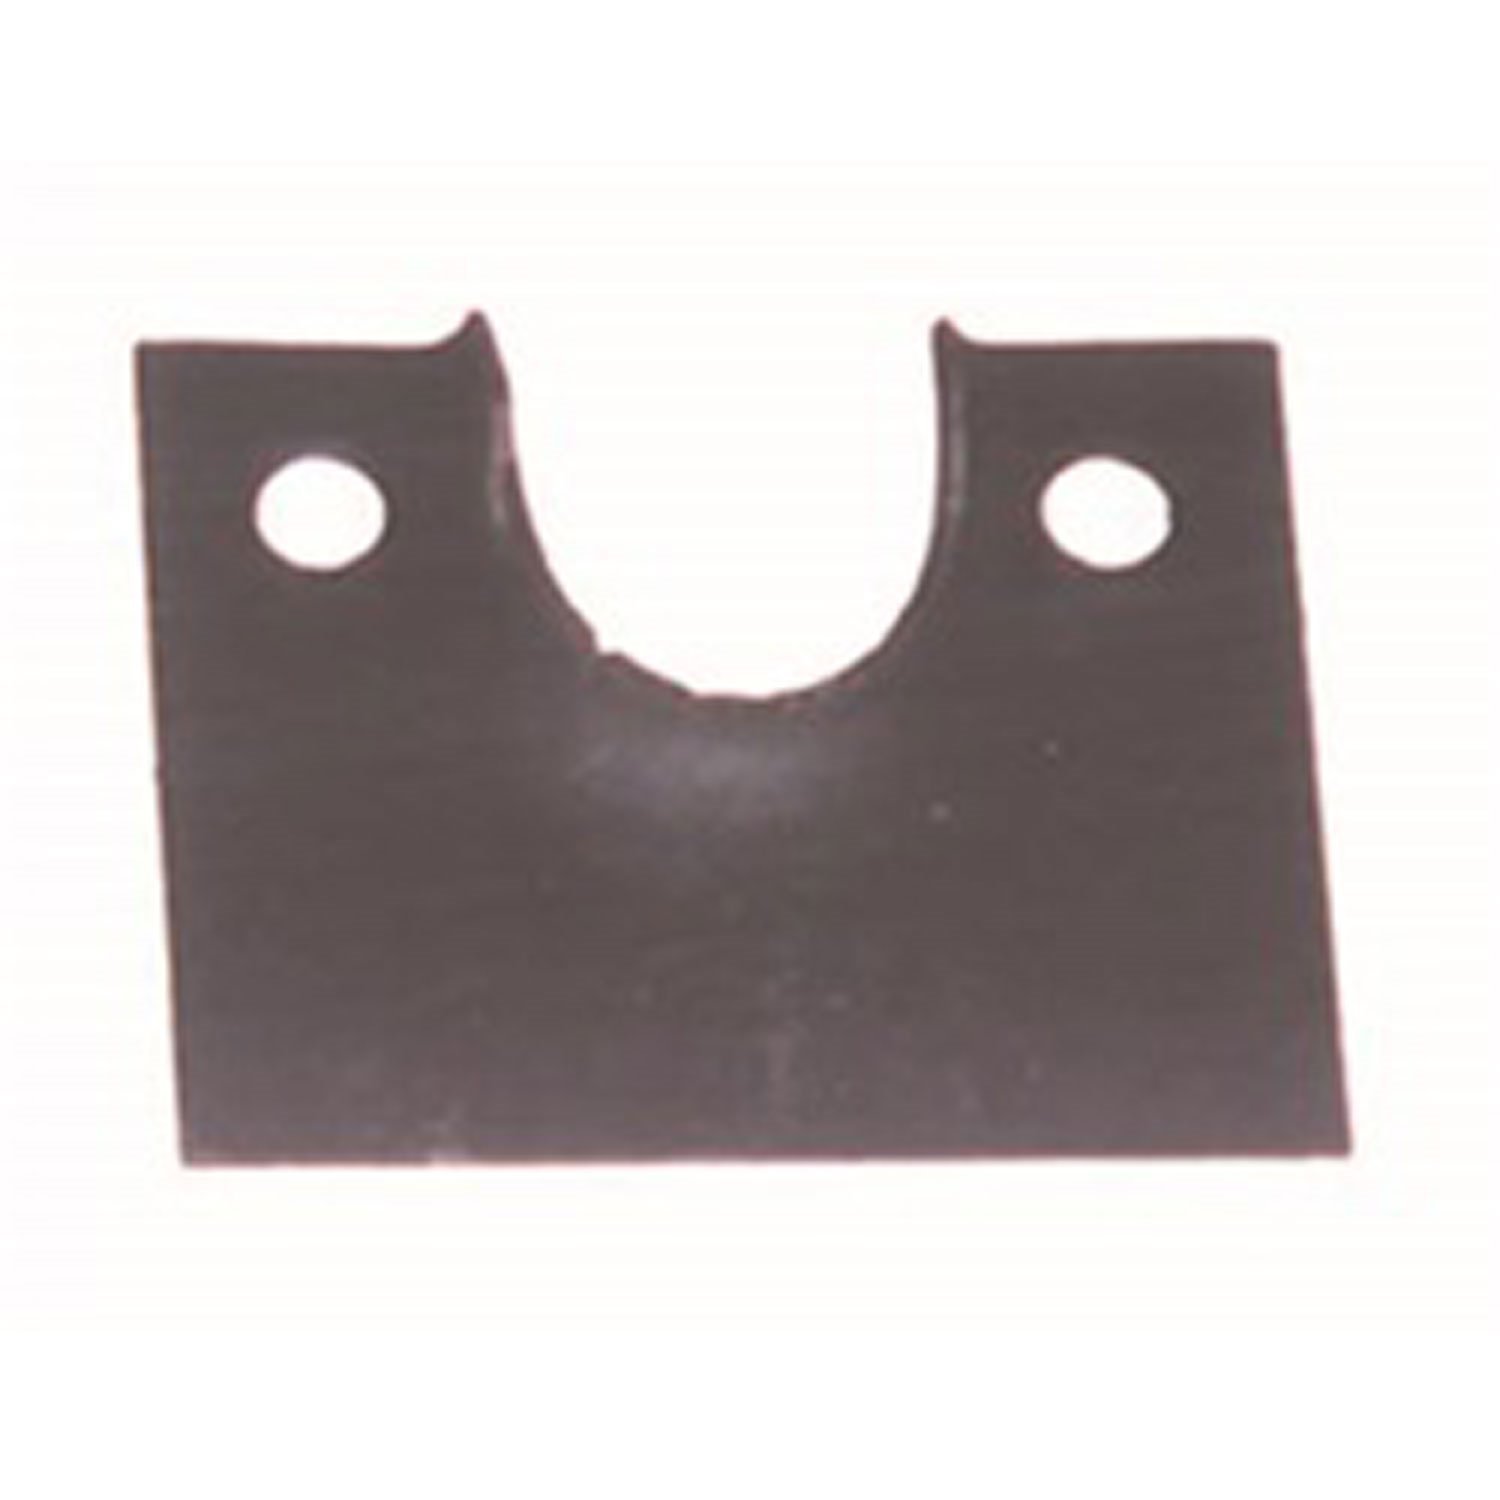 This reproduction rear seat pivot bracket from Omix-ADA fits 41-45 Willys MB and Ford GPW.